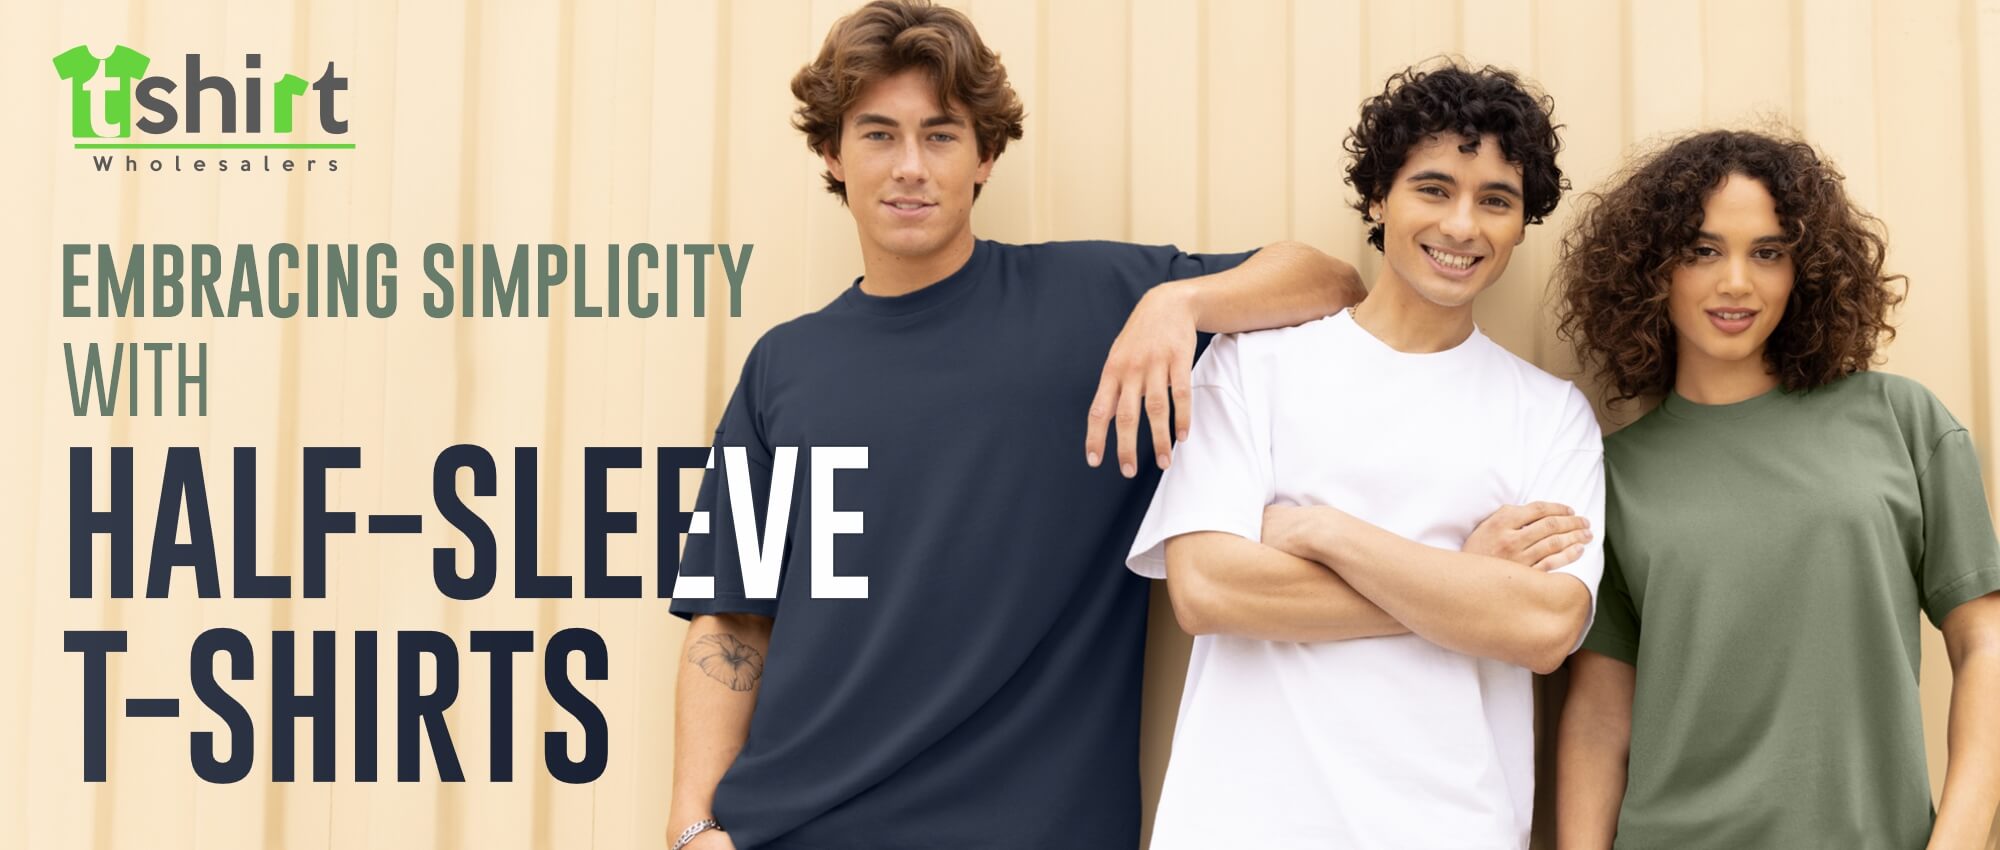 EMBRACING SIMPLICITY WITH HALF-SLEEVE T-SHIRTS